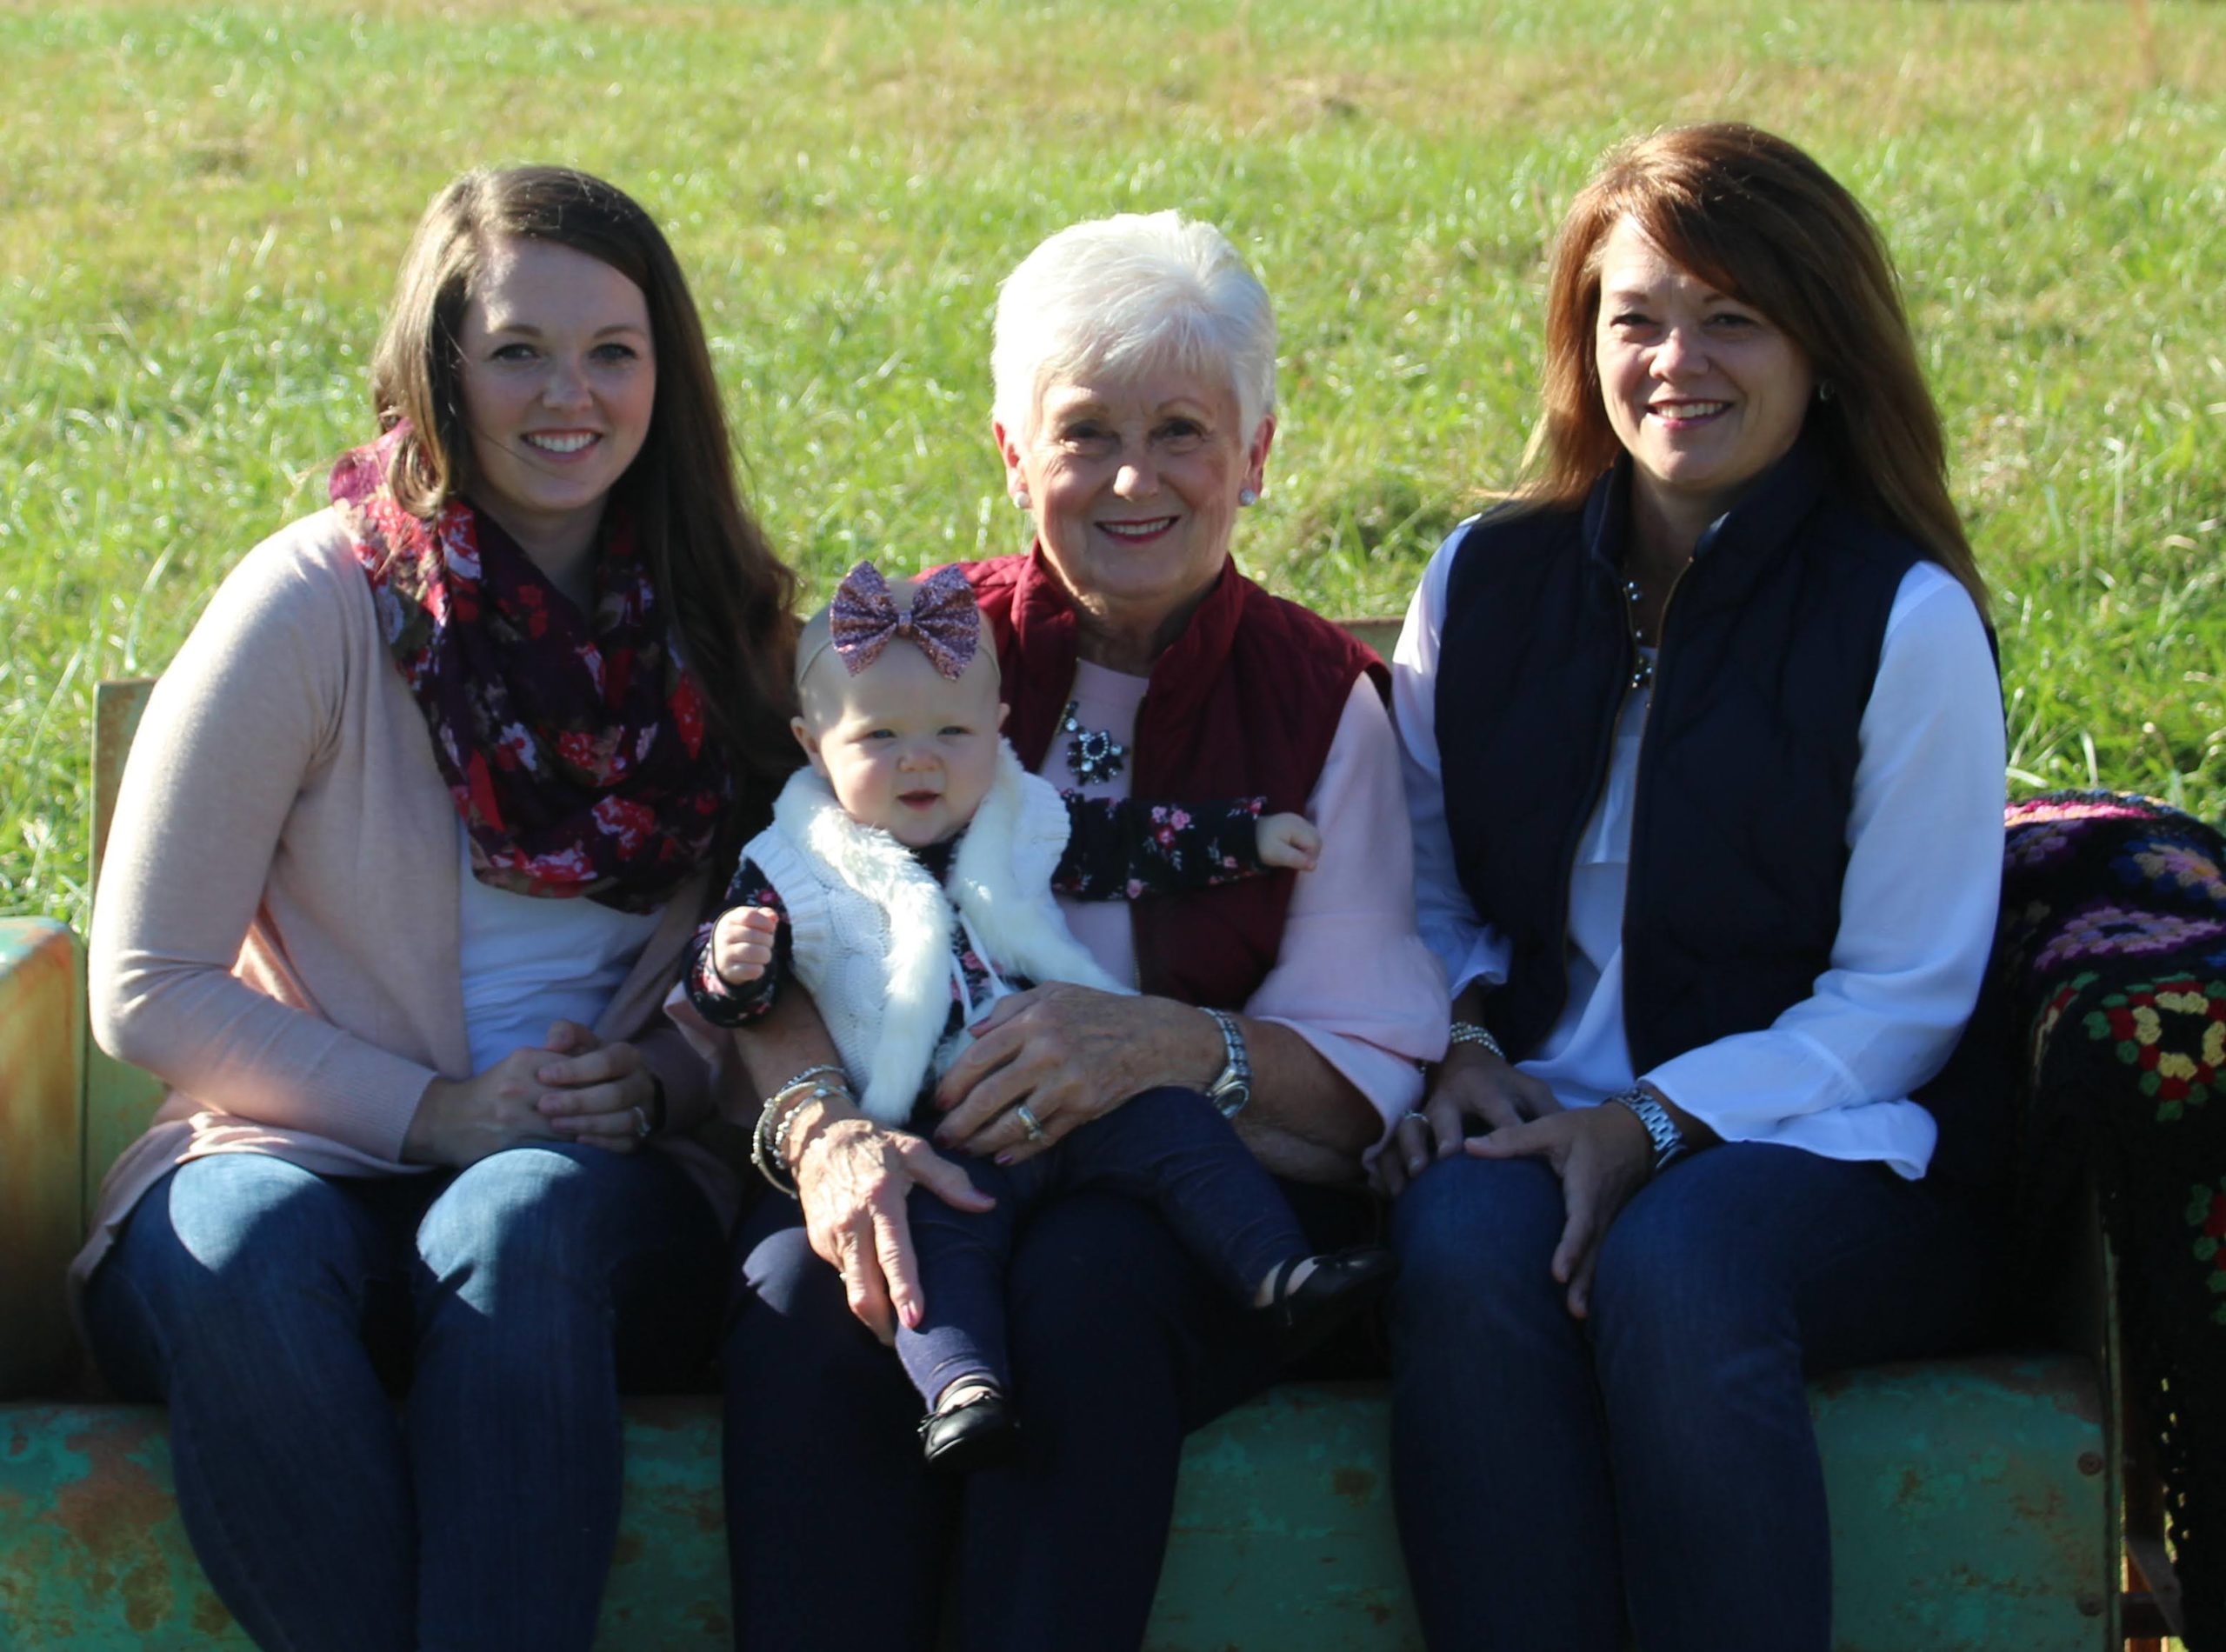 Moms and Daughters: with Sandy Hoffman, Julie Underhill, and Kaley Brown